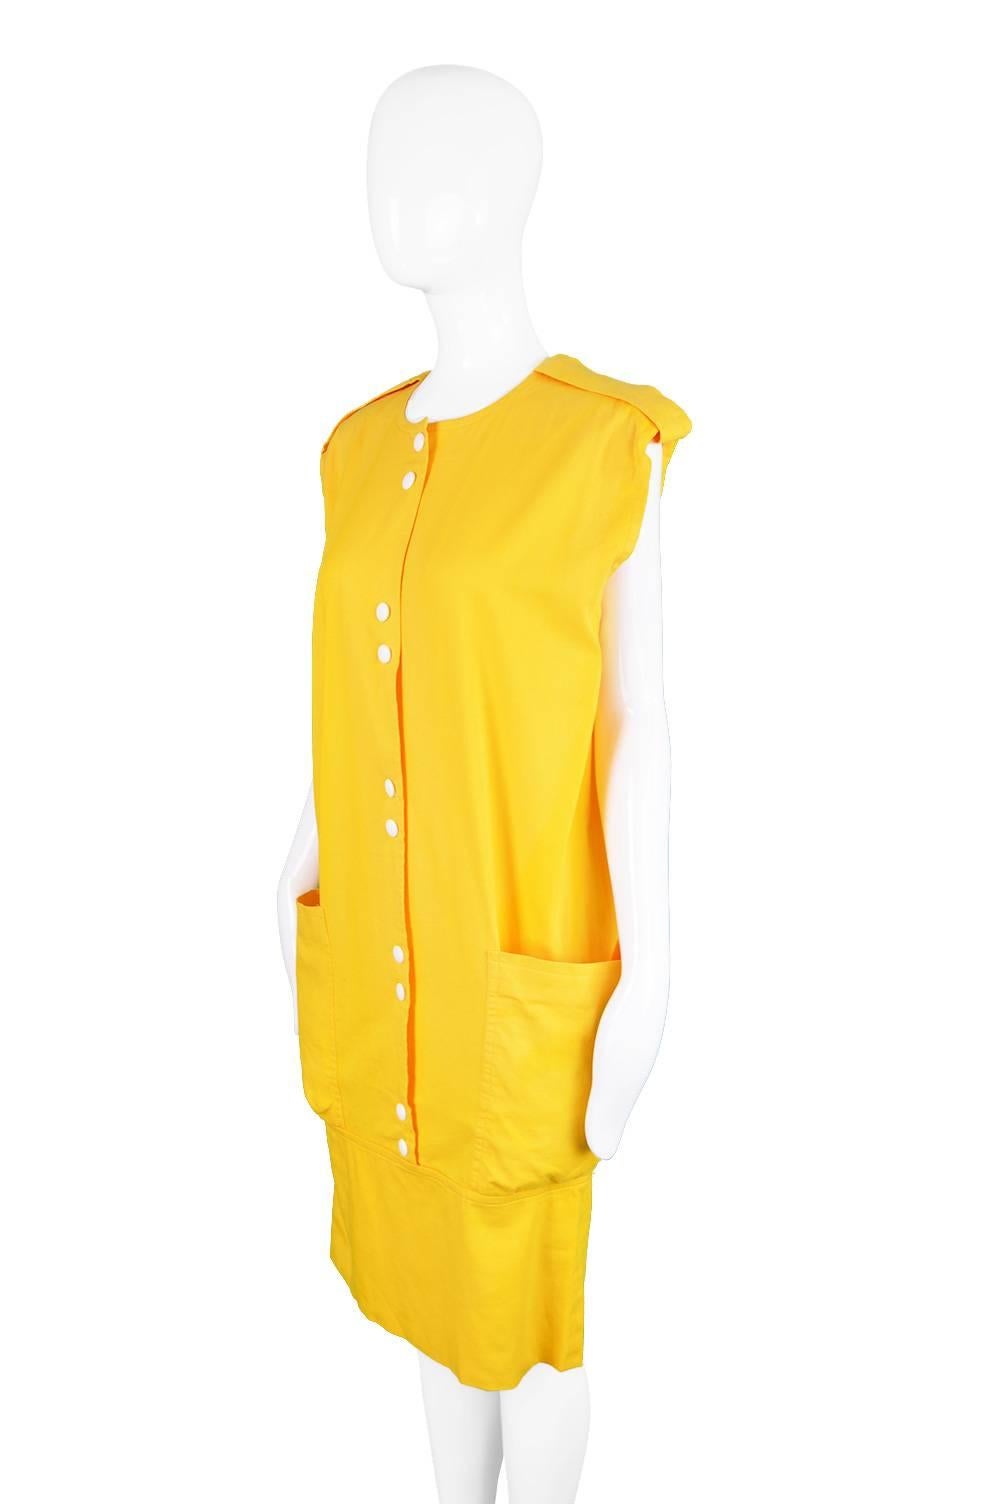 Pierre Cardin Mustard Yellow Dress with Oversized Patch Pockets, 1980s In Excellent Condition For Sale In Doncaster, South Yorkshire